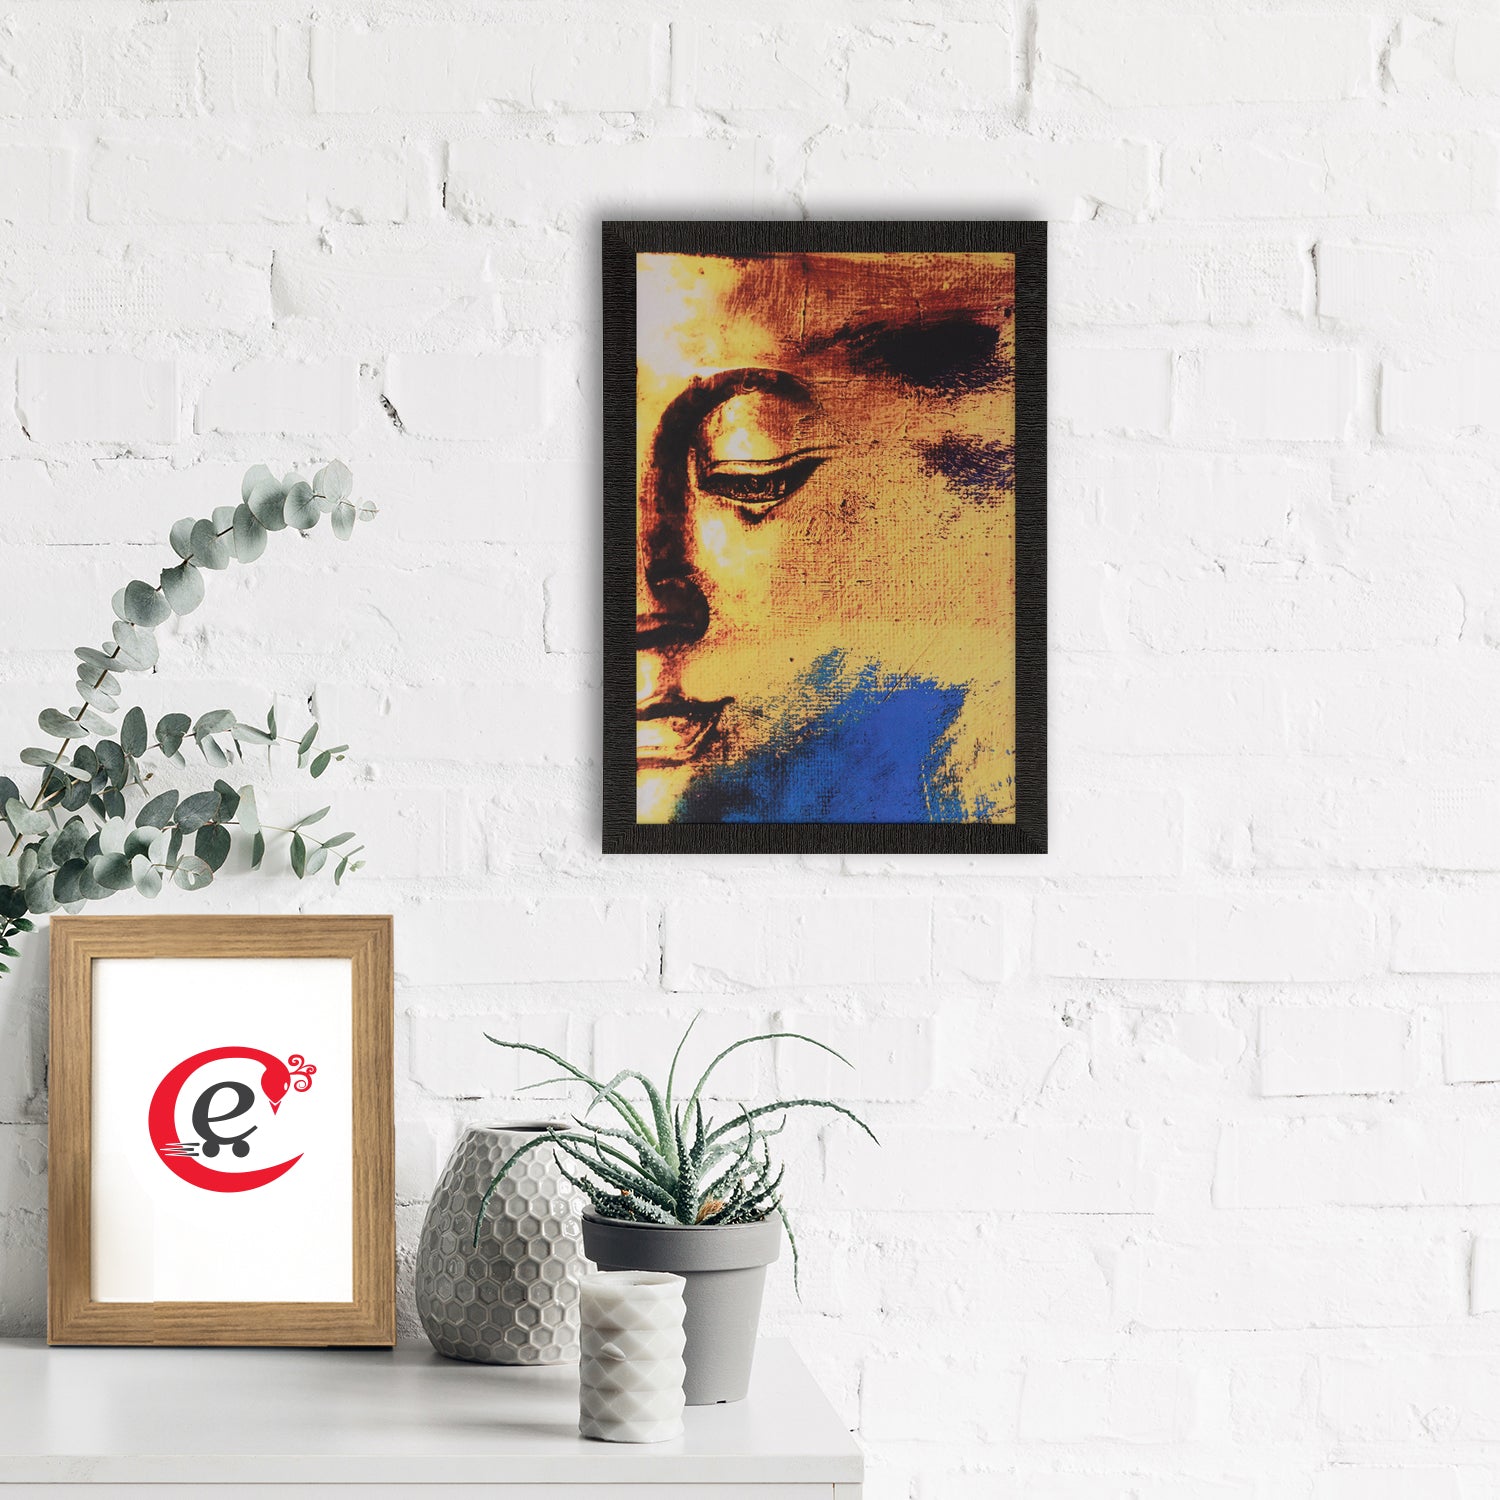 Lord Buddha Painting Digital Printed Abstract Religious Wall Art 1